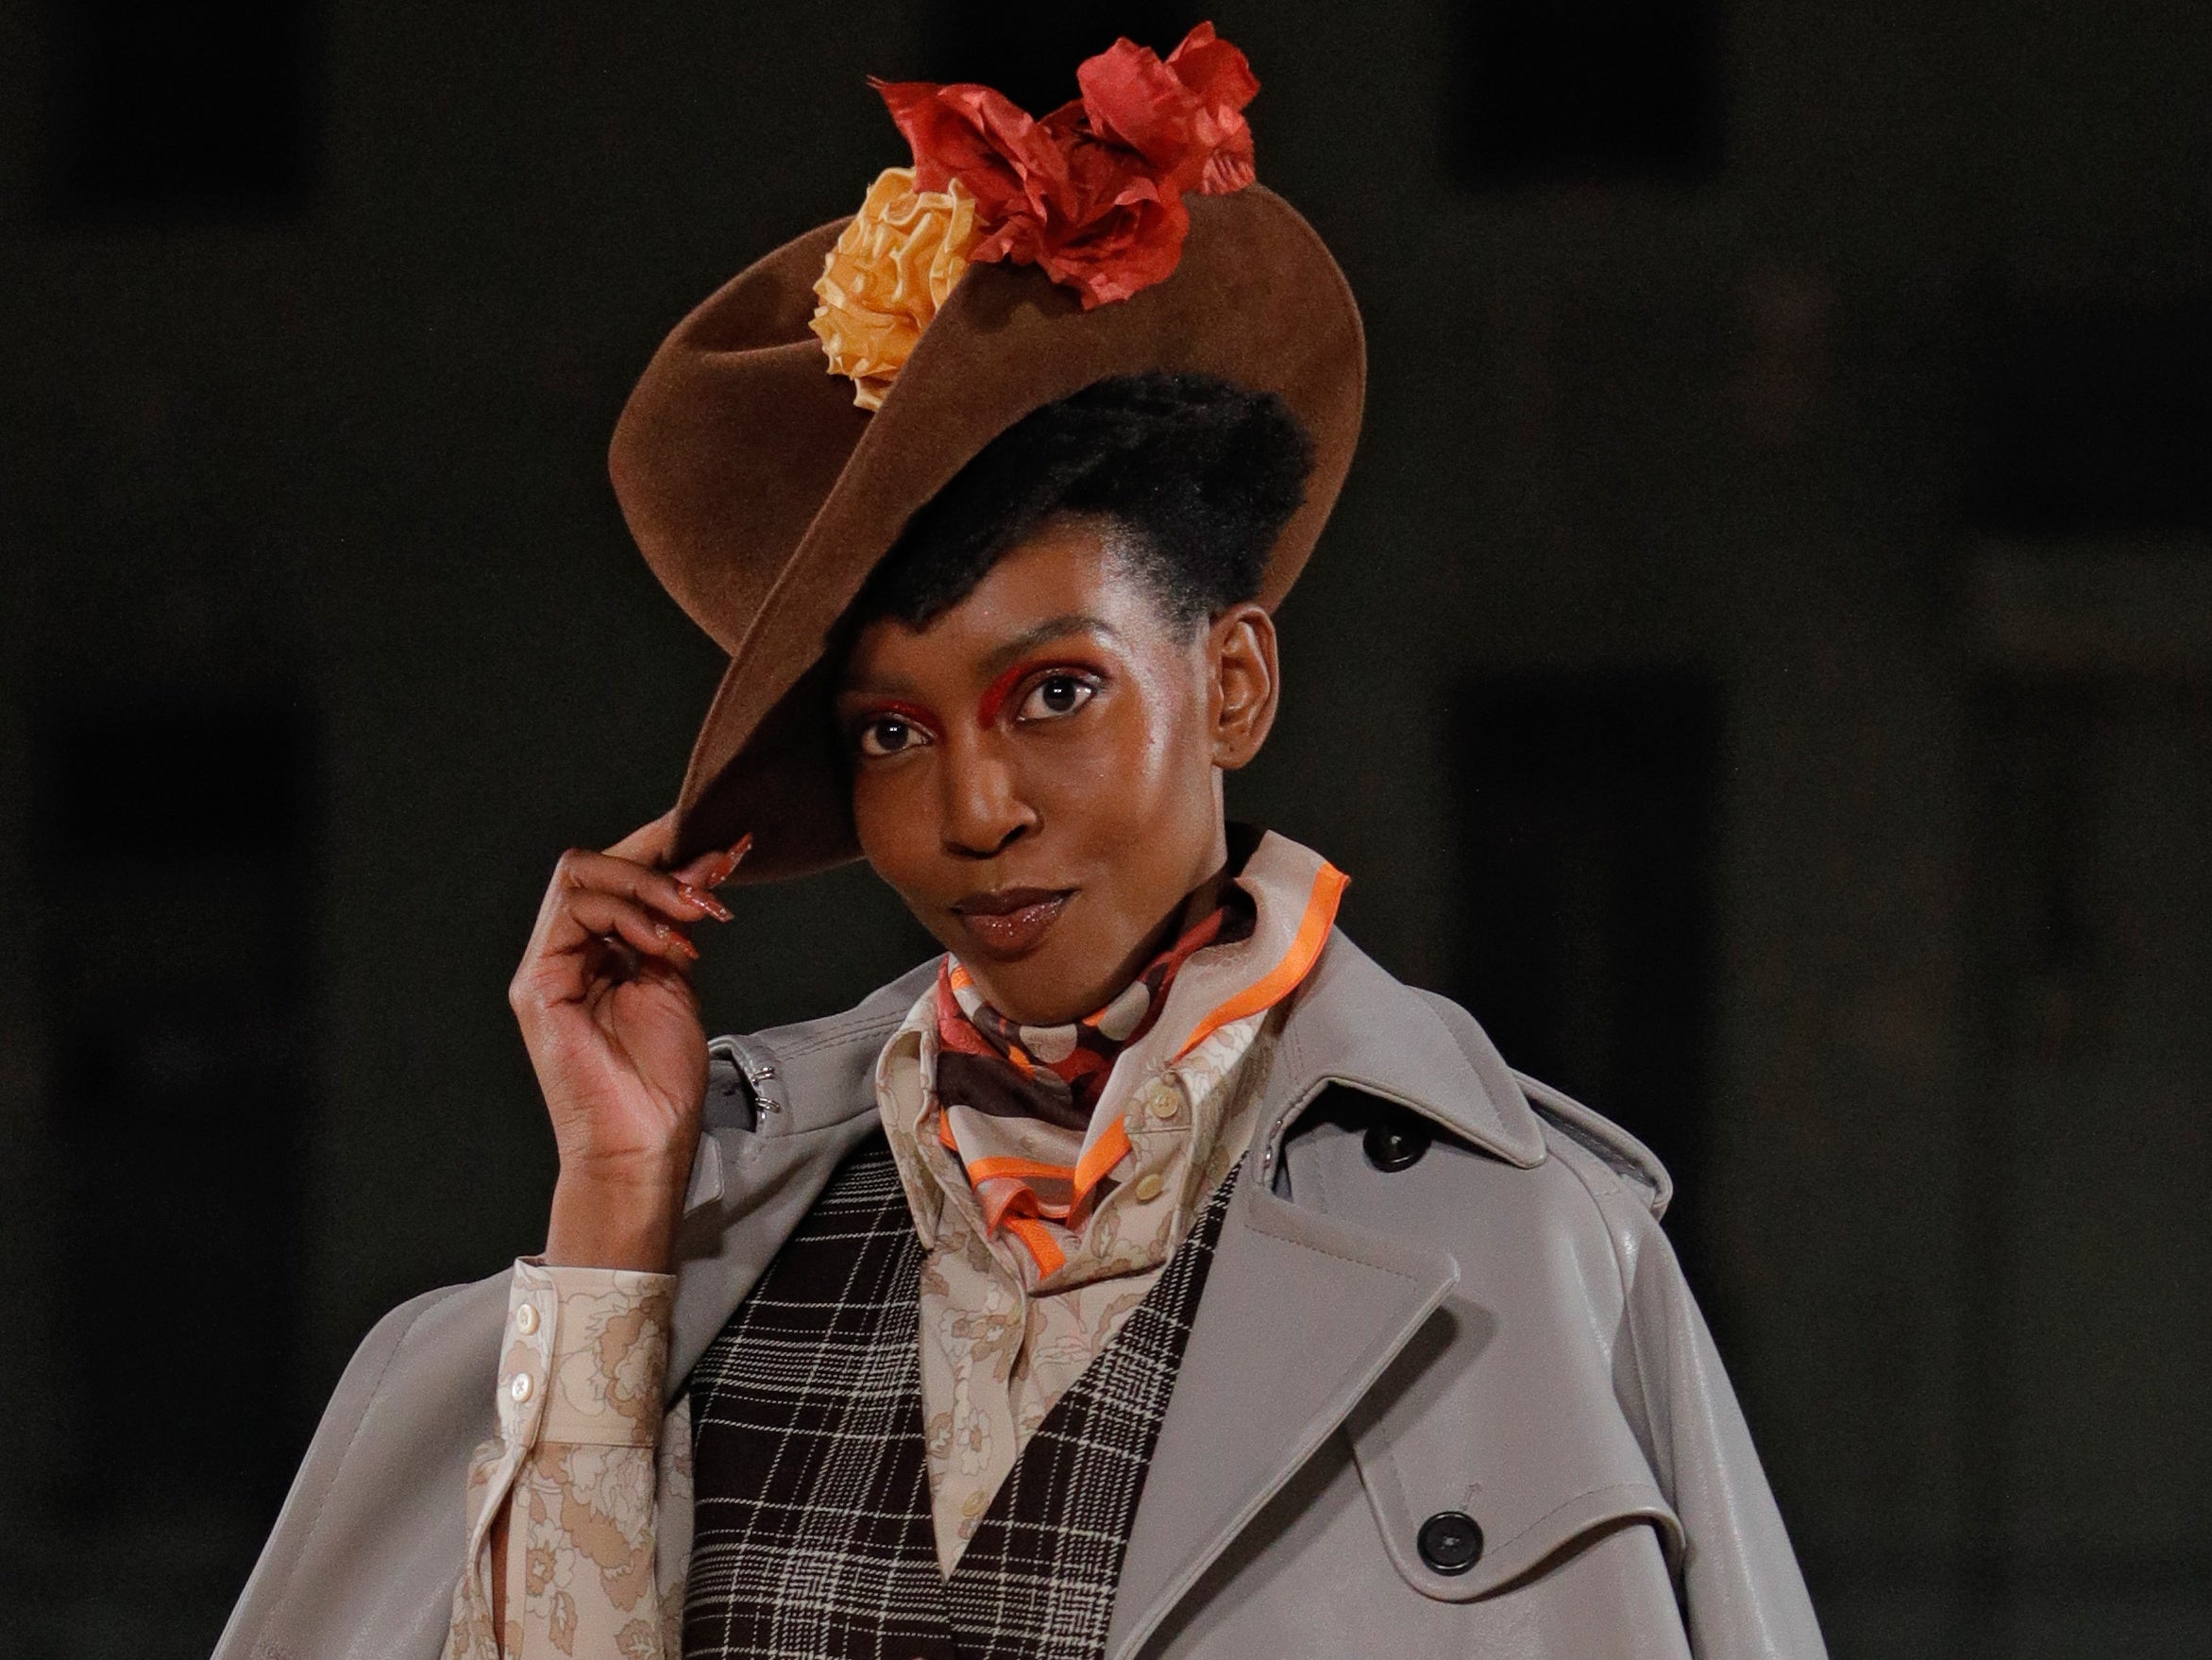 NYFW: Black Models Closed Out Fashion Week With A Bang At Marc Jacobs